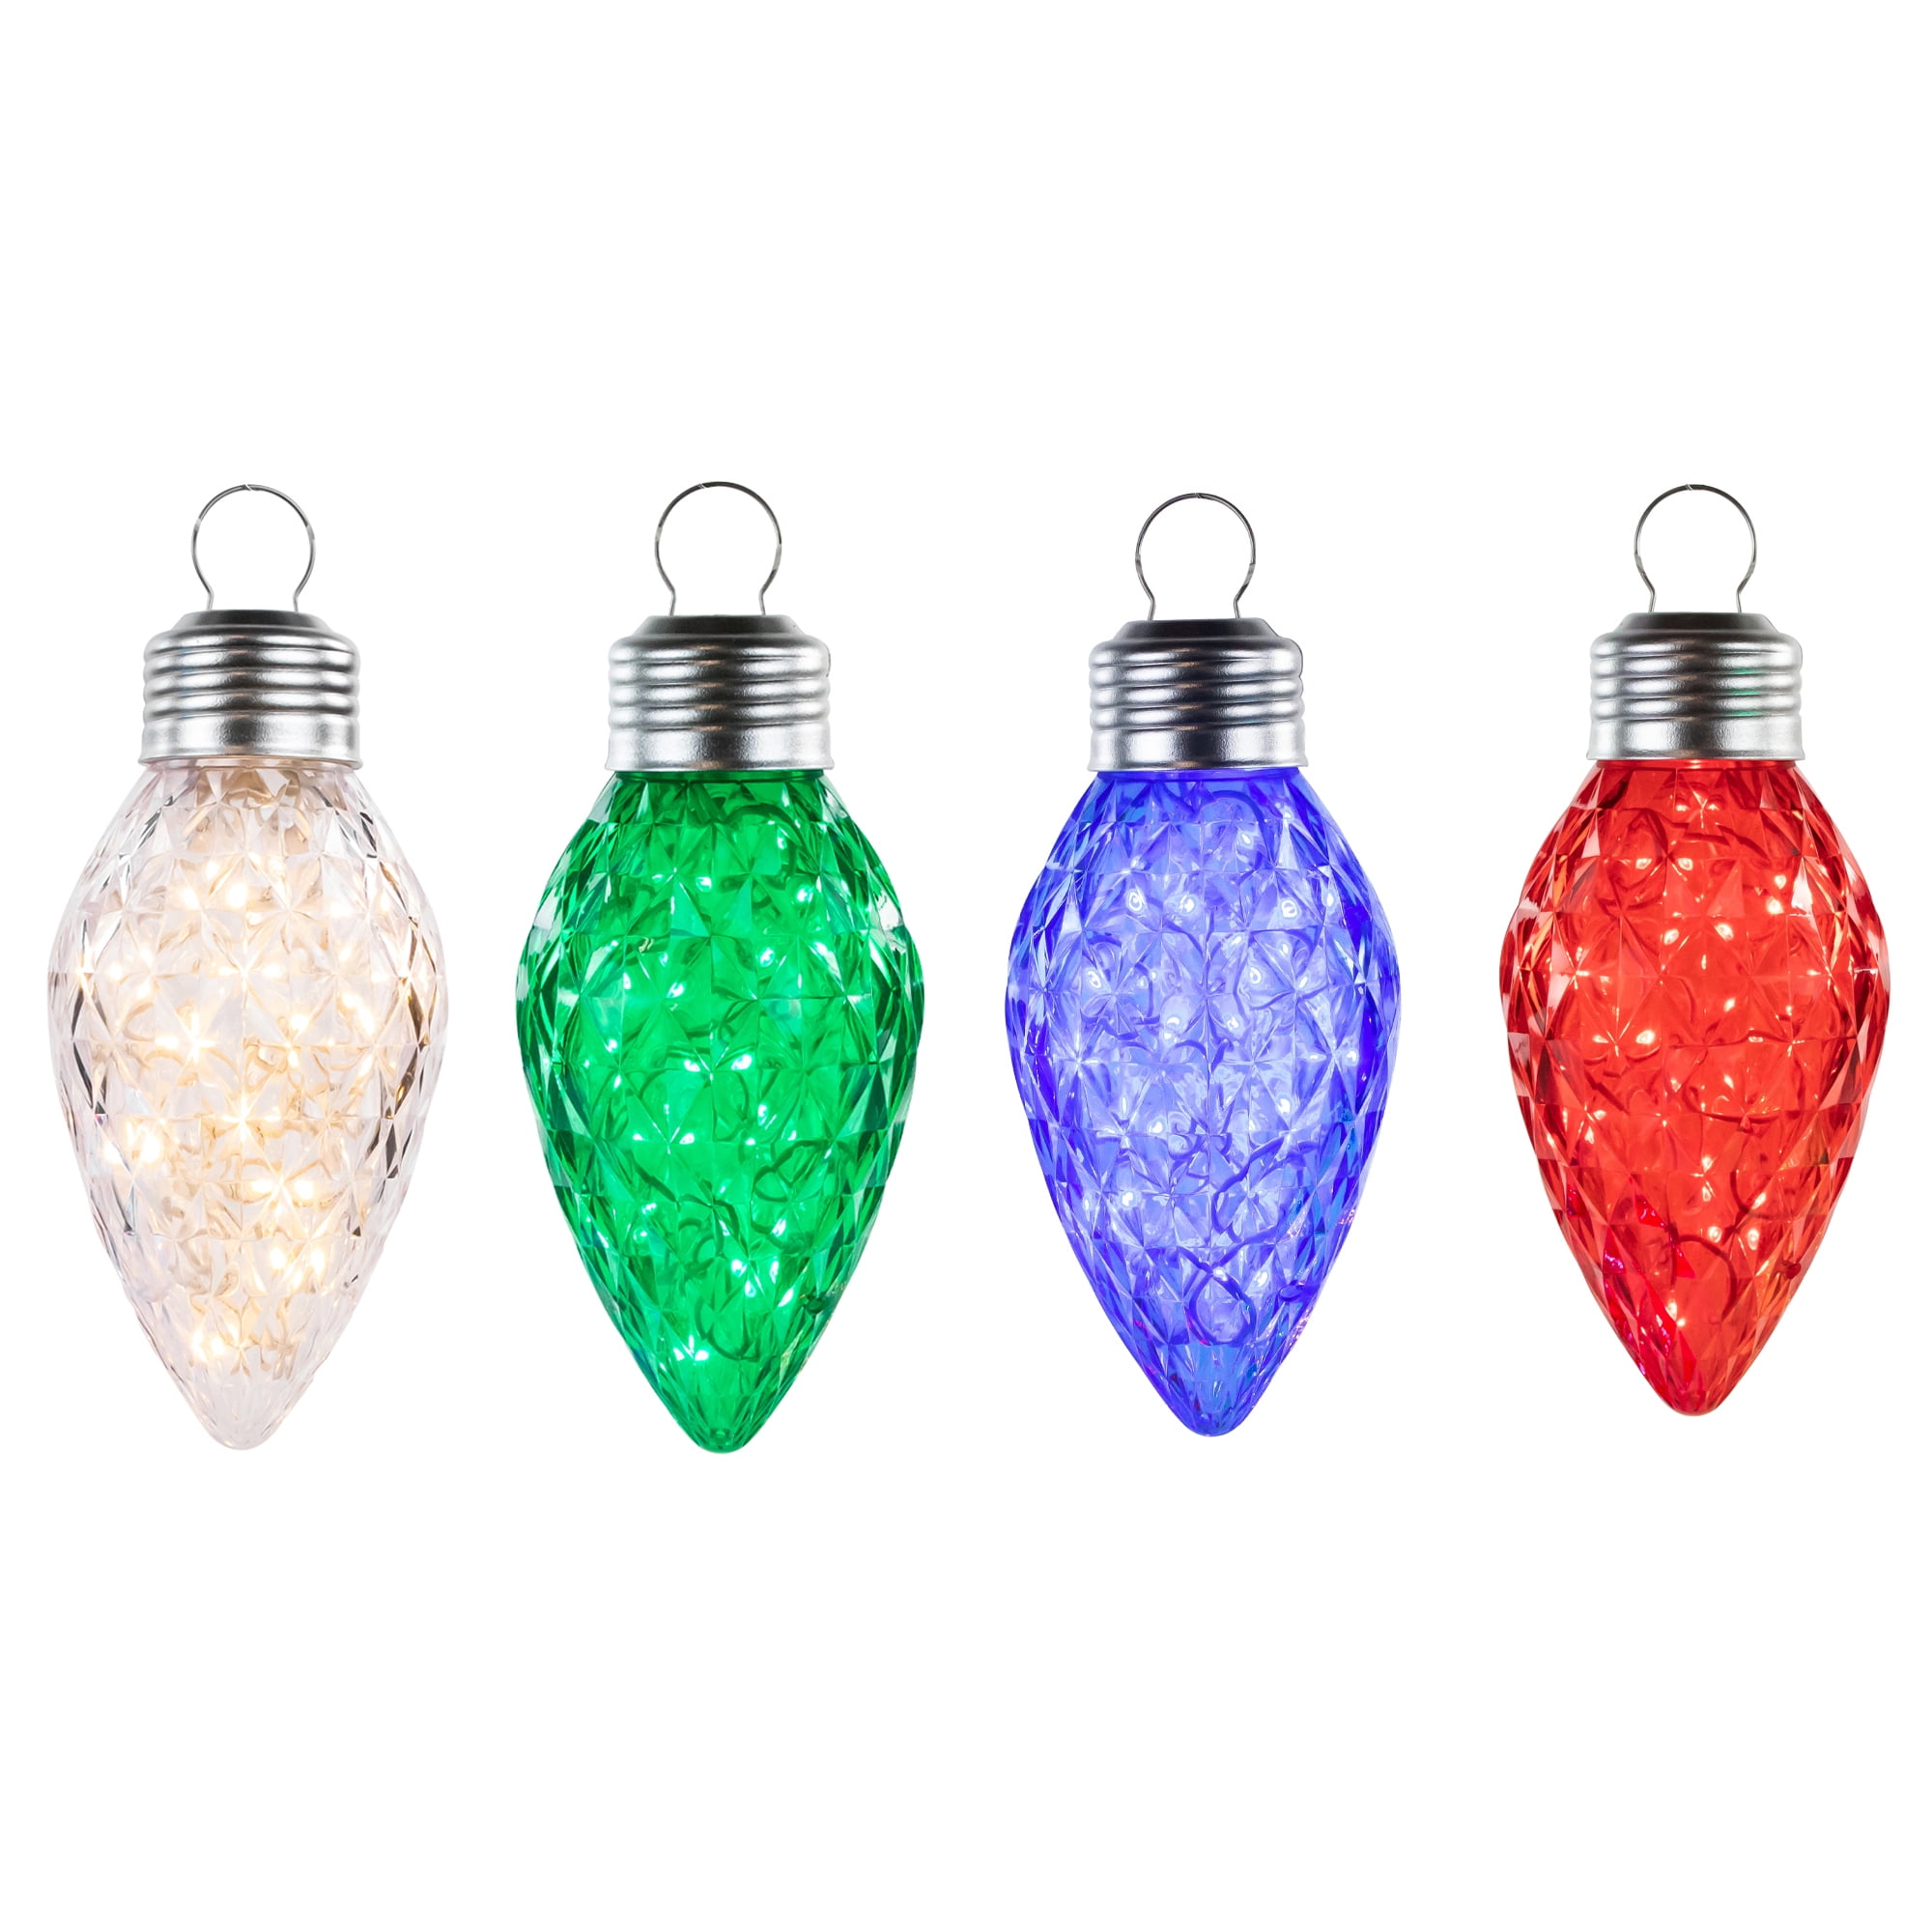 Northlight Set of 4 LED Multi-Color Commercial C9 Style Faceted Twinkle ...